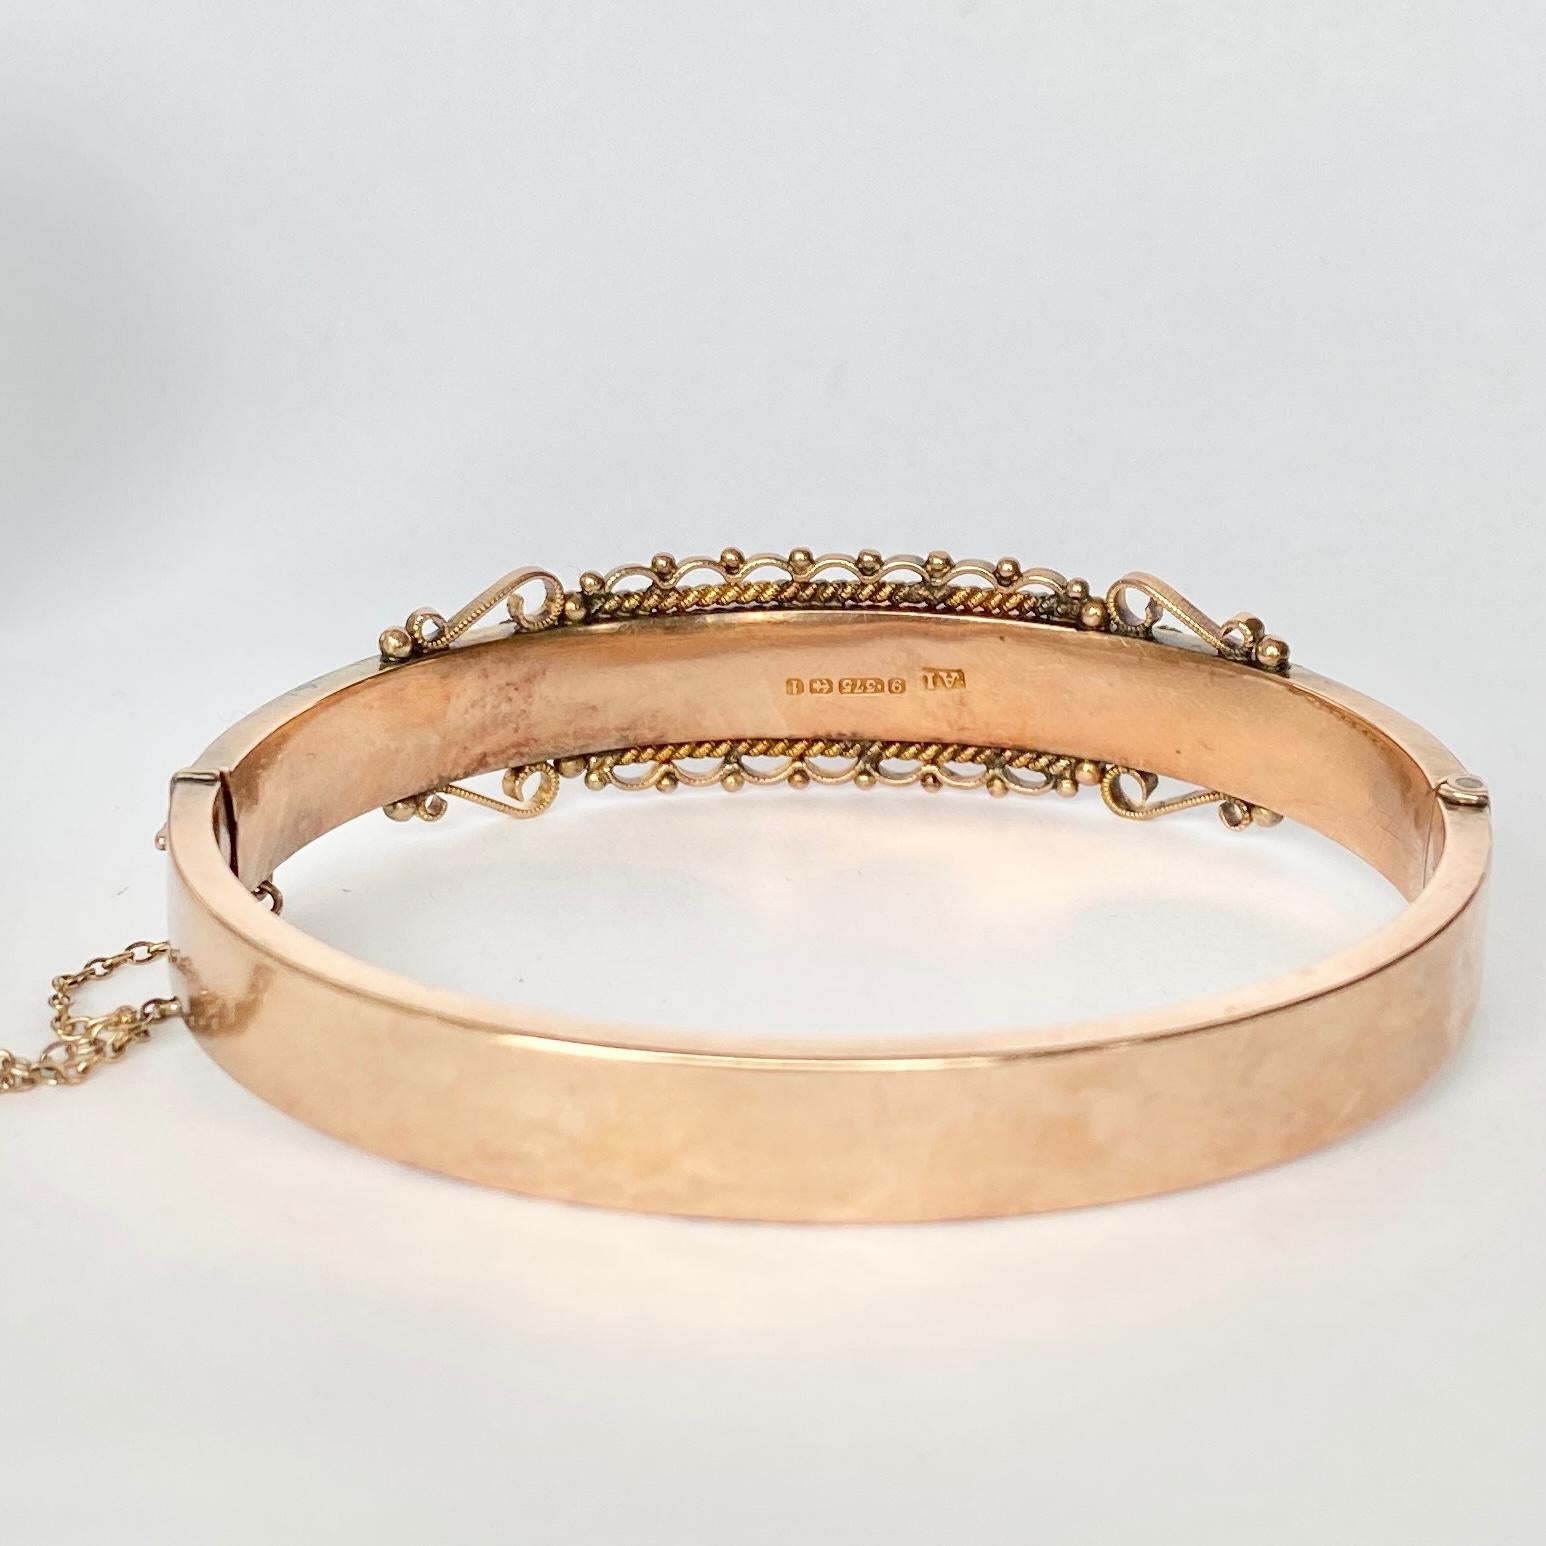 The 9 carat gold is bright and the bangle has so much detail. The bangle has a panel on the front holding three diamonds and has plenty of detail as you can see in the images. The diamonds total 20pts. Fully hallmarked Birmingham 1908.

Inner